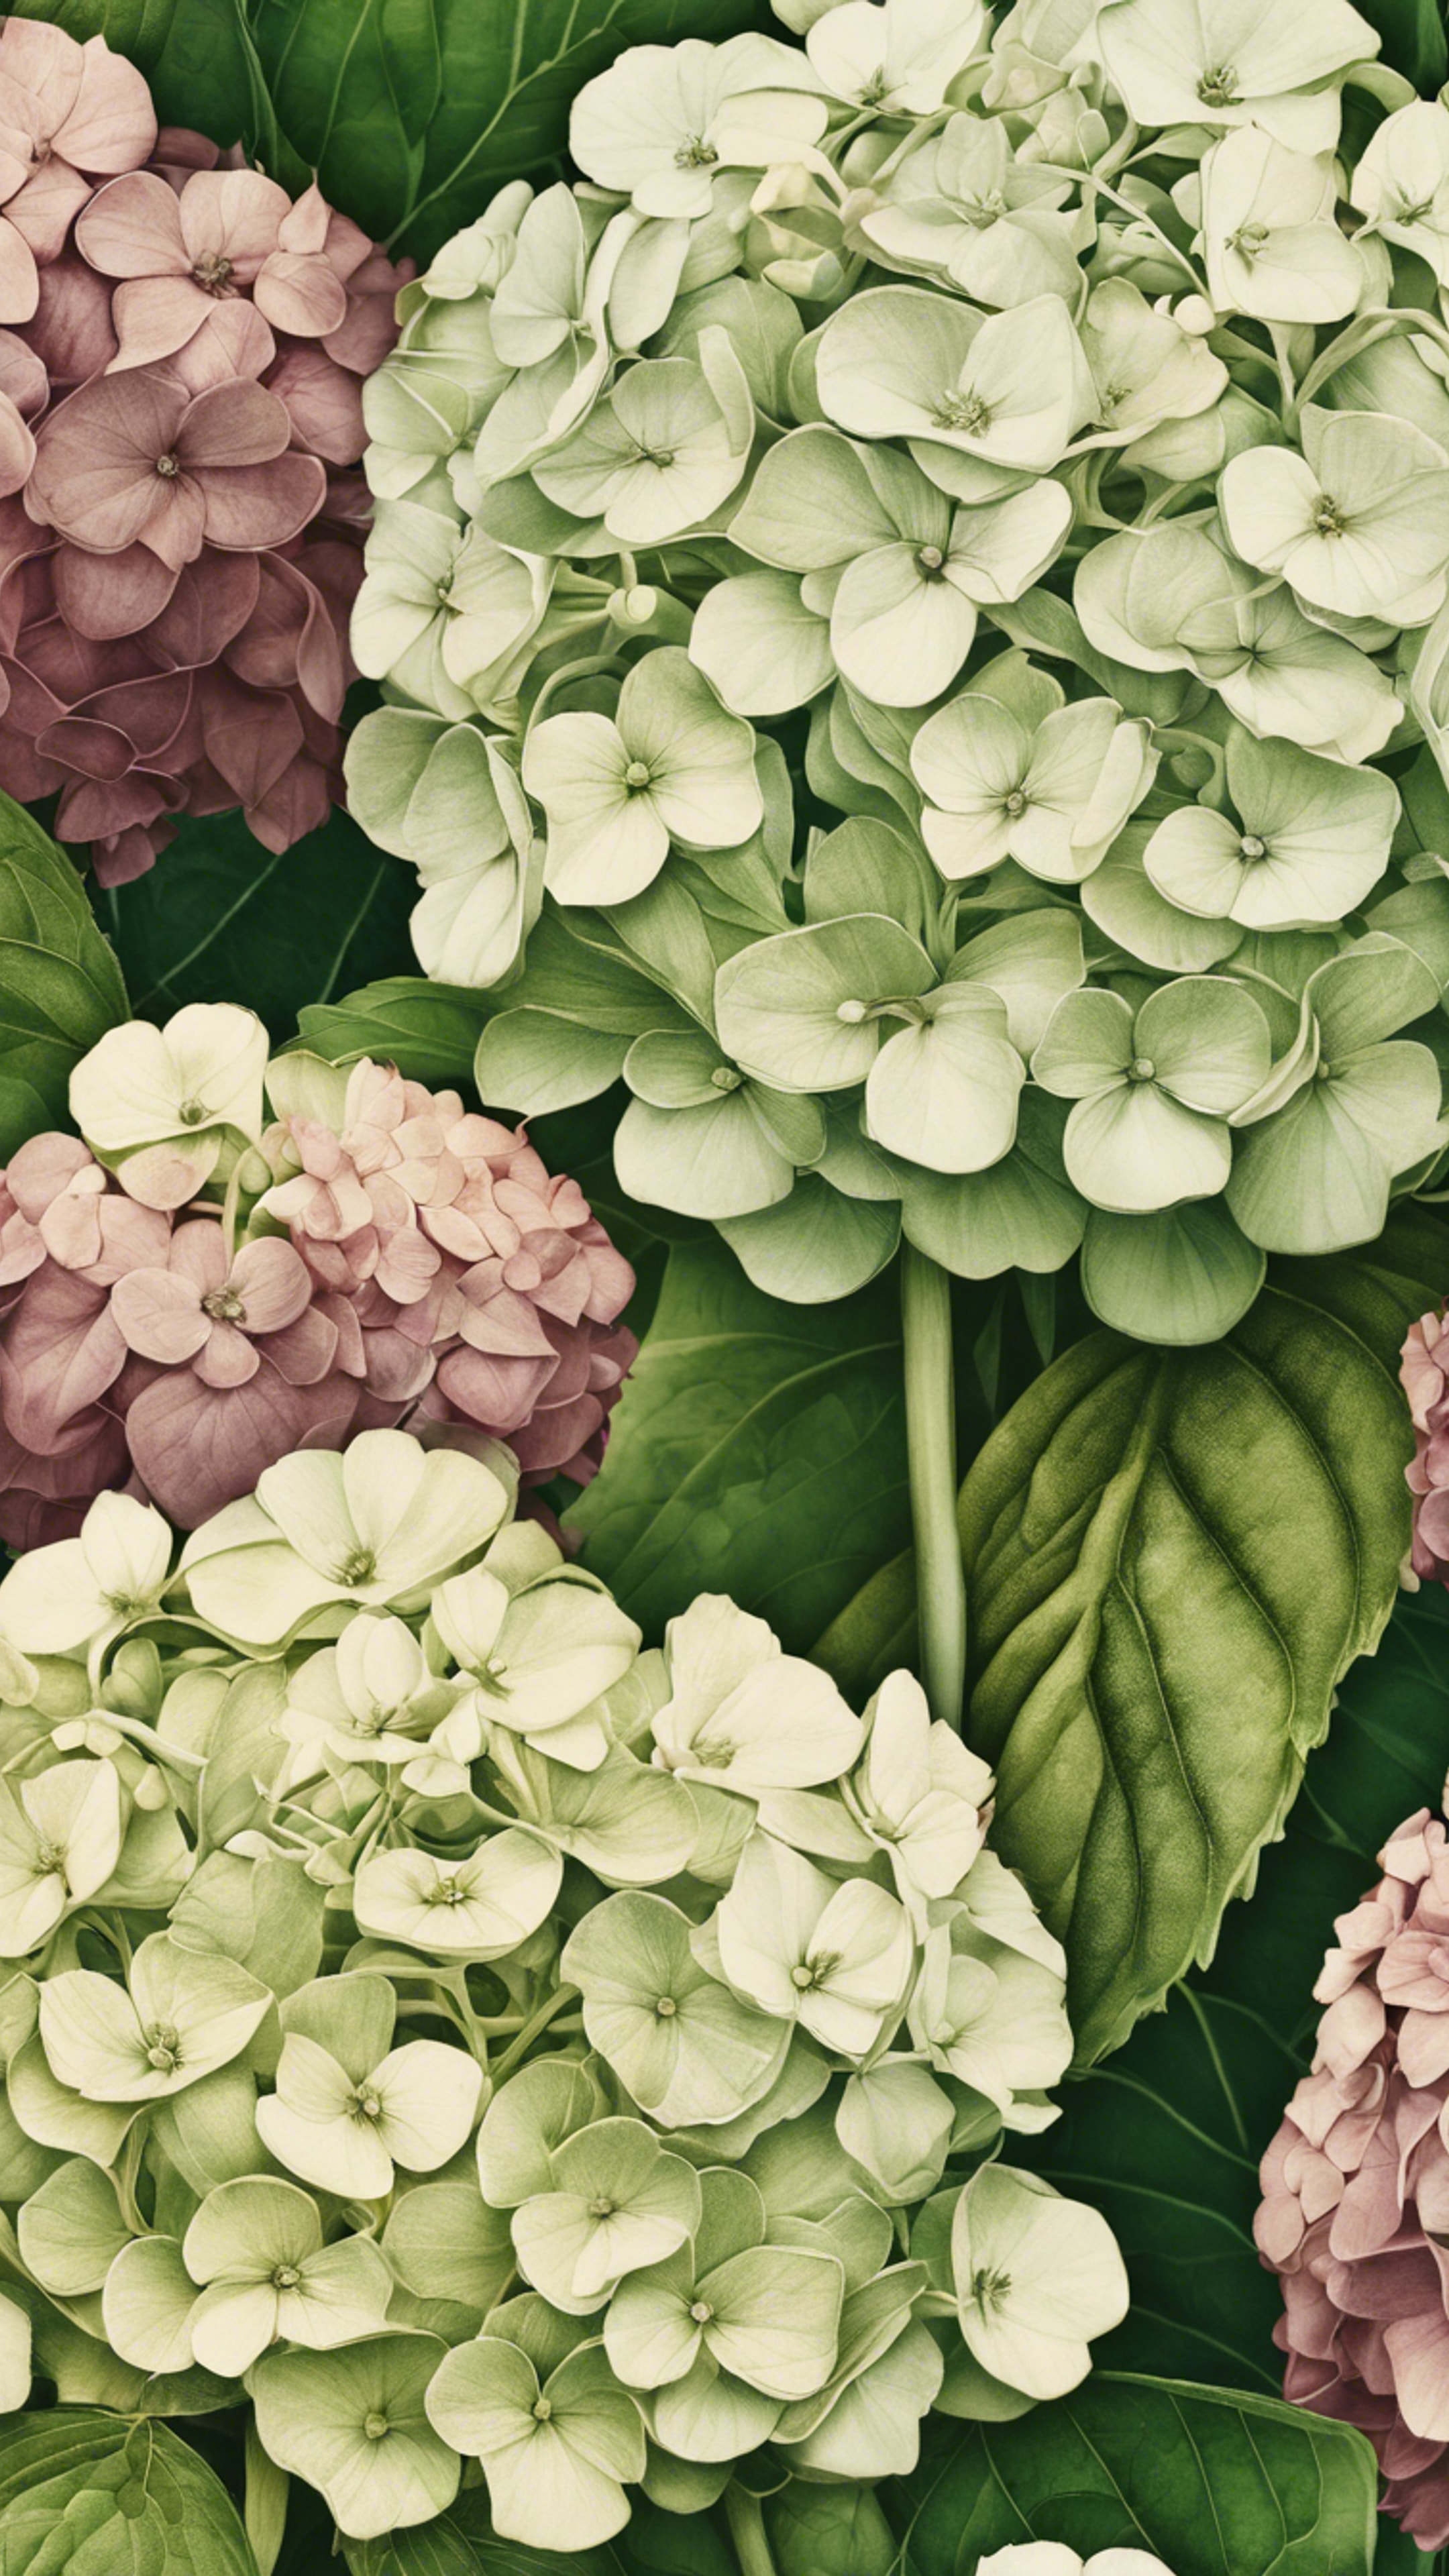 A detailed depiction of a beautifully aged, antique hydrangea illustration from an old botany book.壁紙[67df05c72c1d42618eb3]